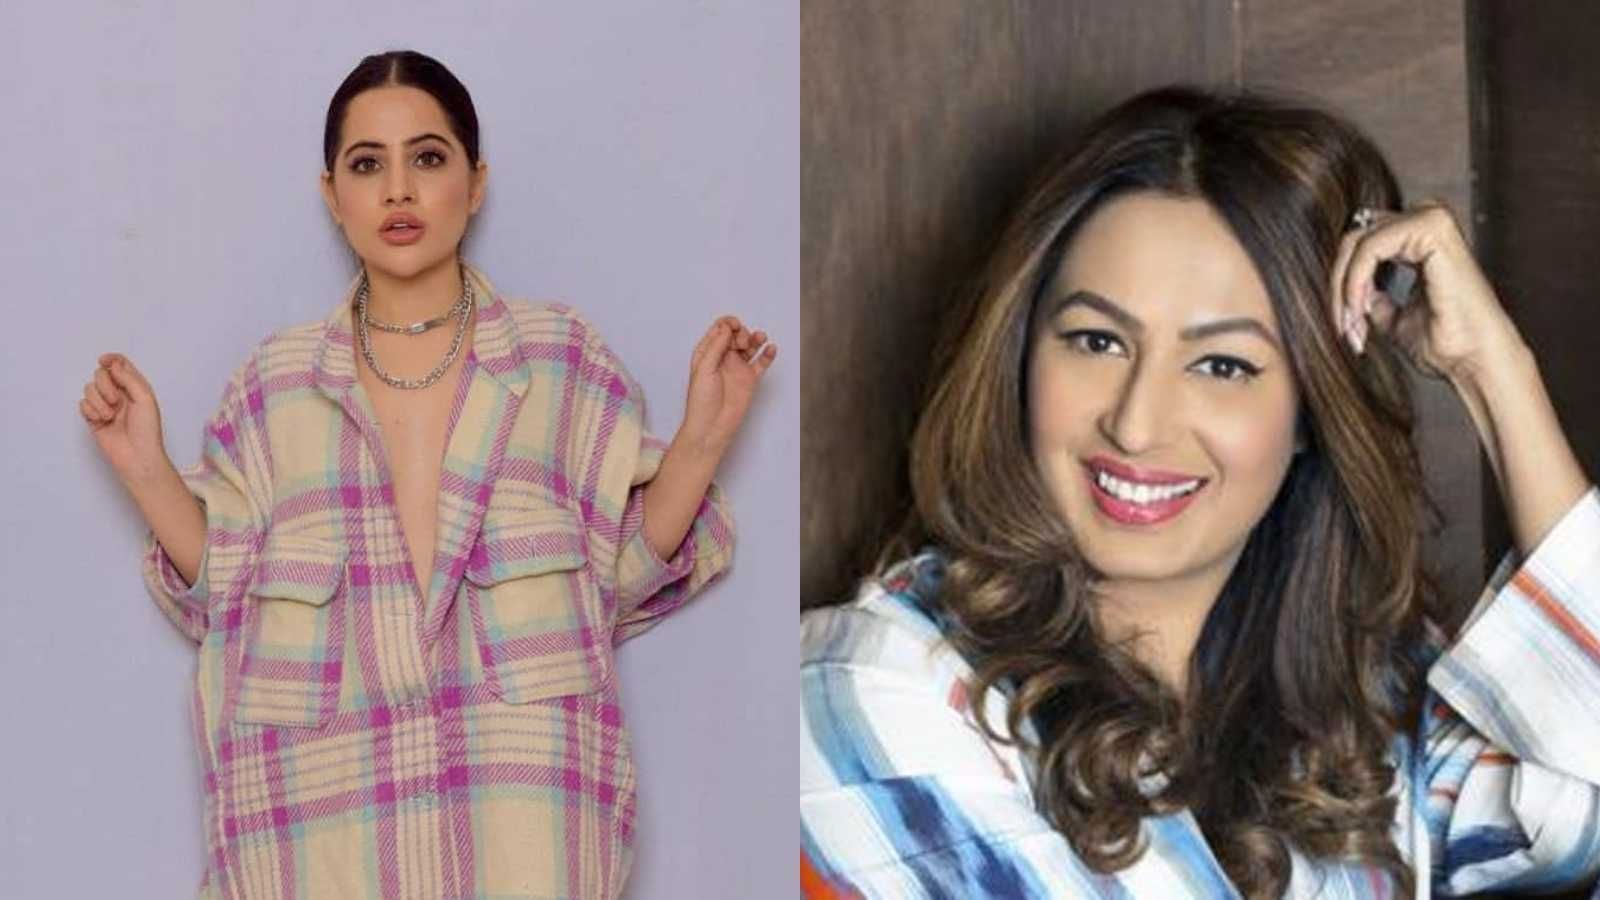 Urfi Javed claps back after Kashmera Shah says she's famous only on Instagram and nowhere else: 'Aap toh dono mein hi nahi ho'